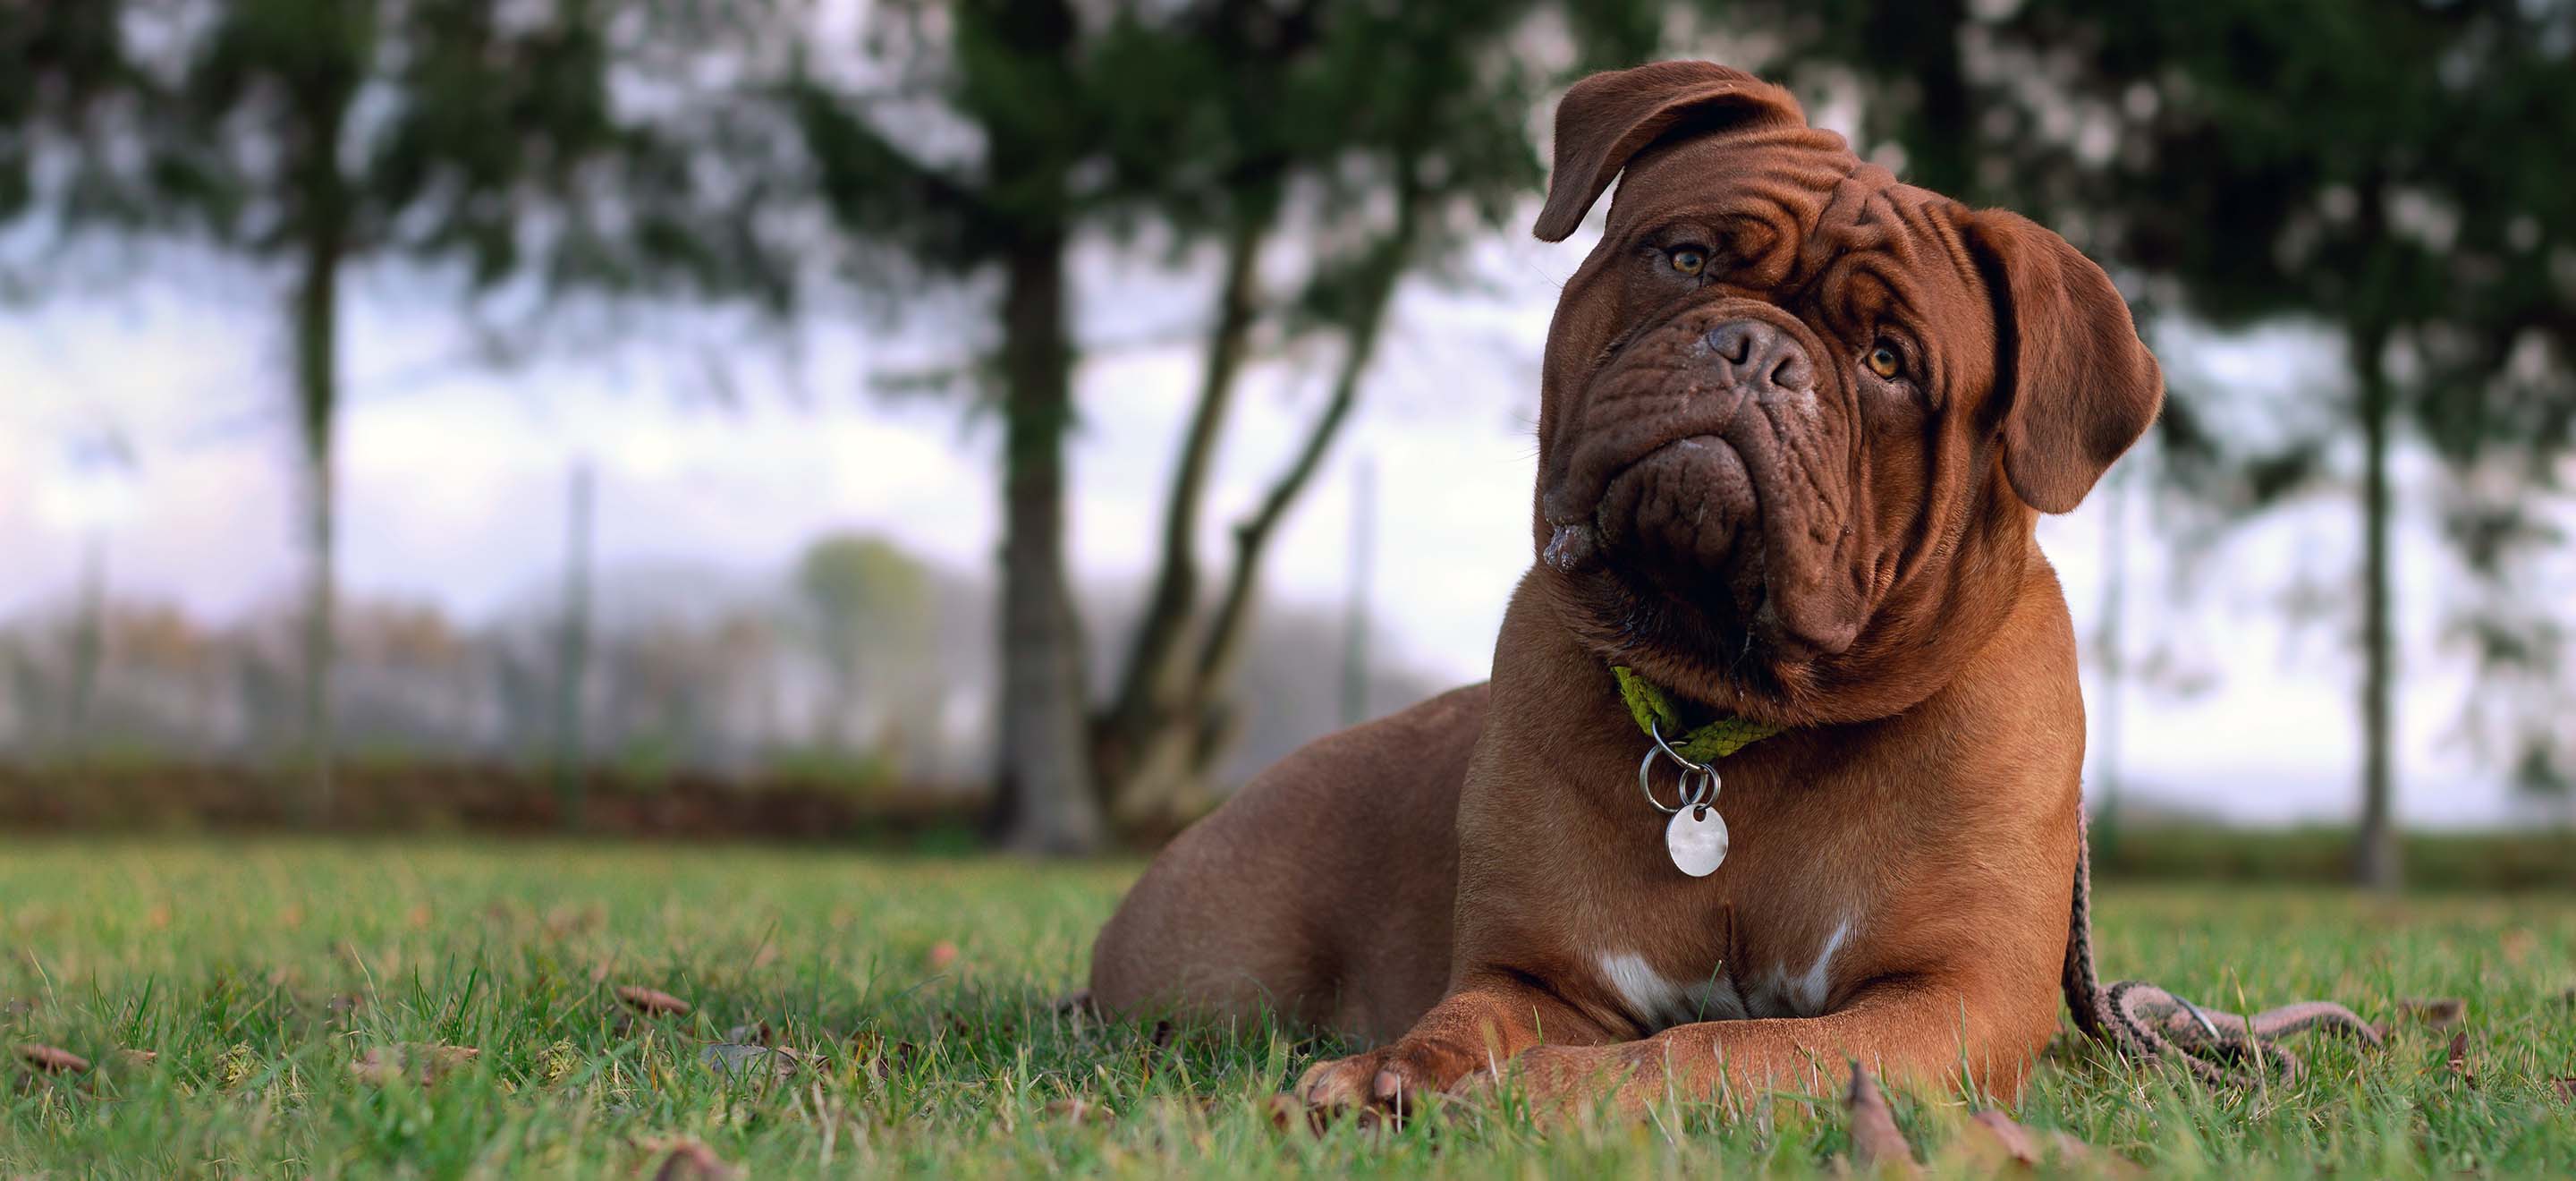 A red Dogue de Bordeaux laying in a grassy park image